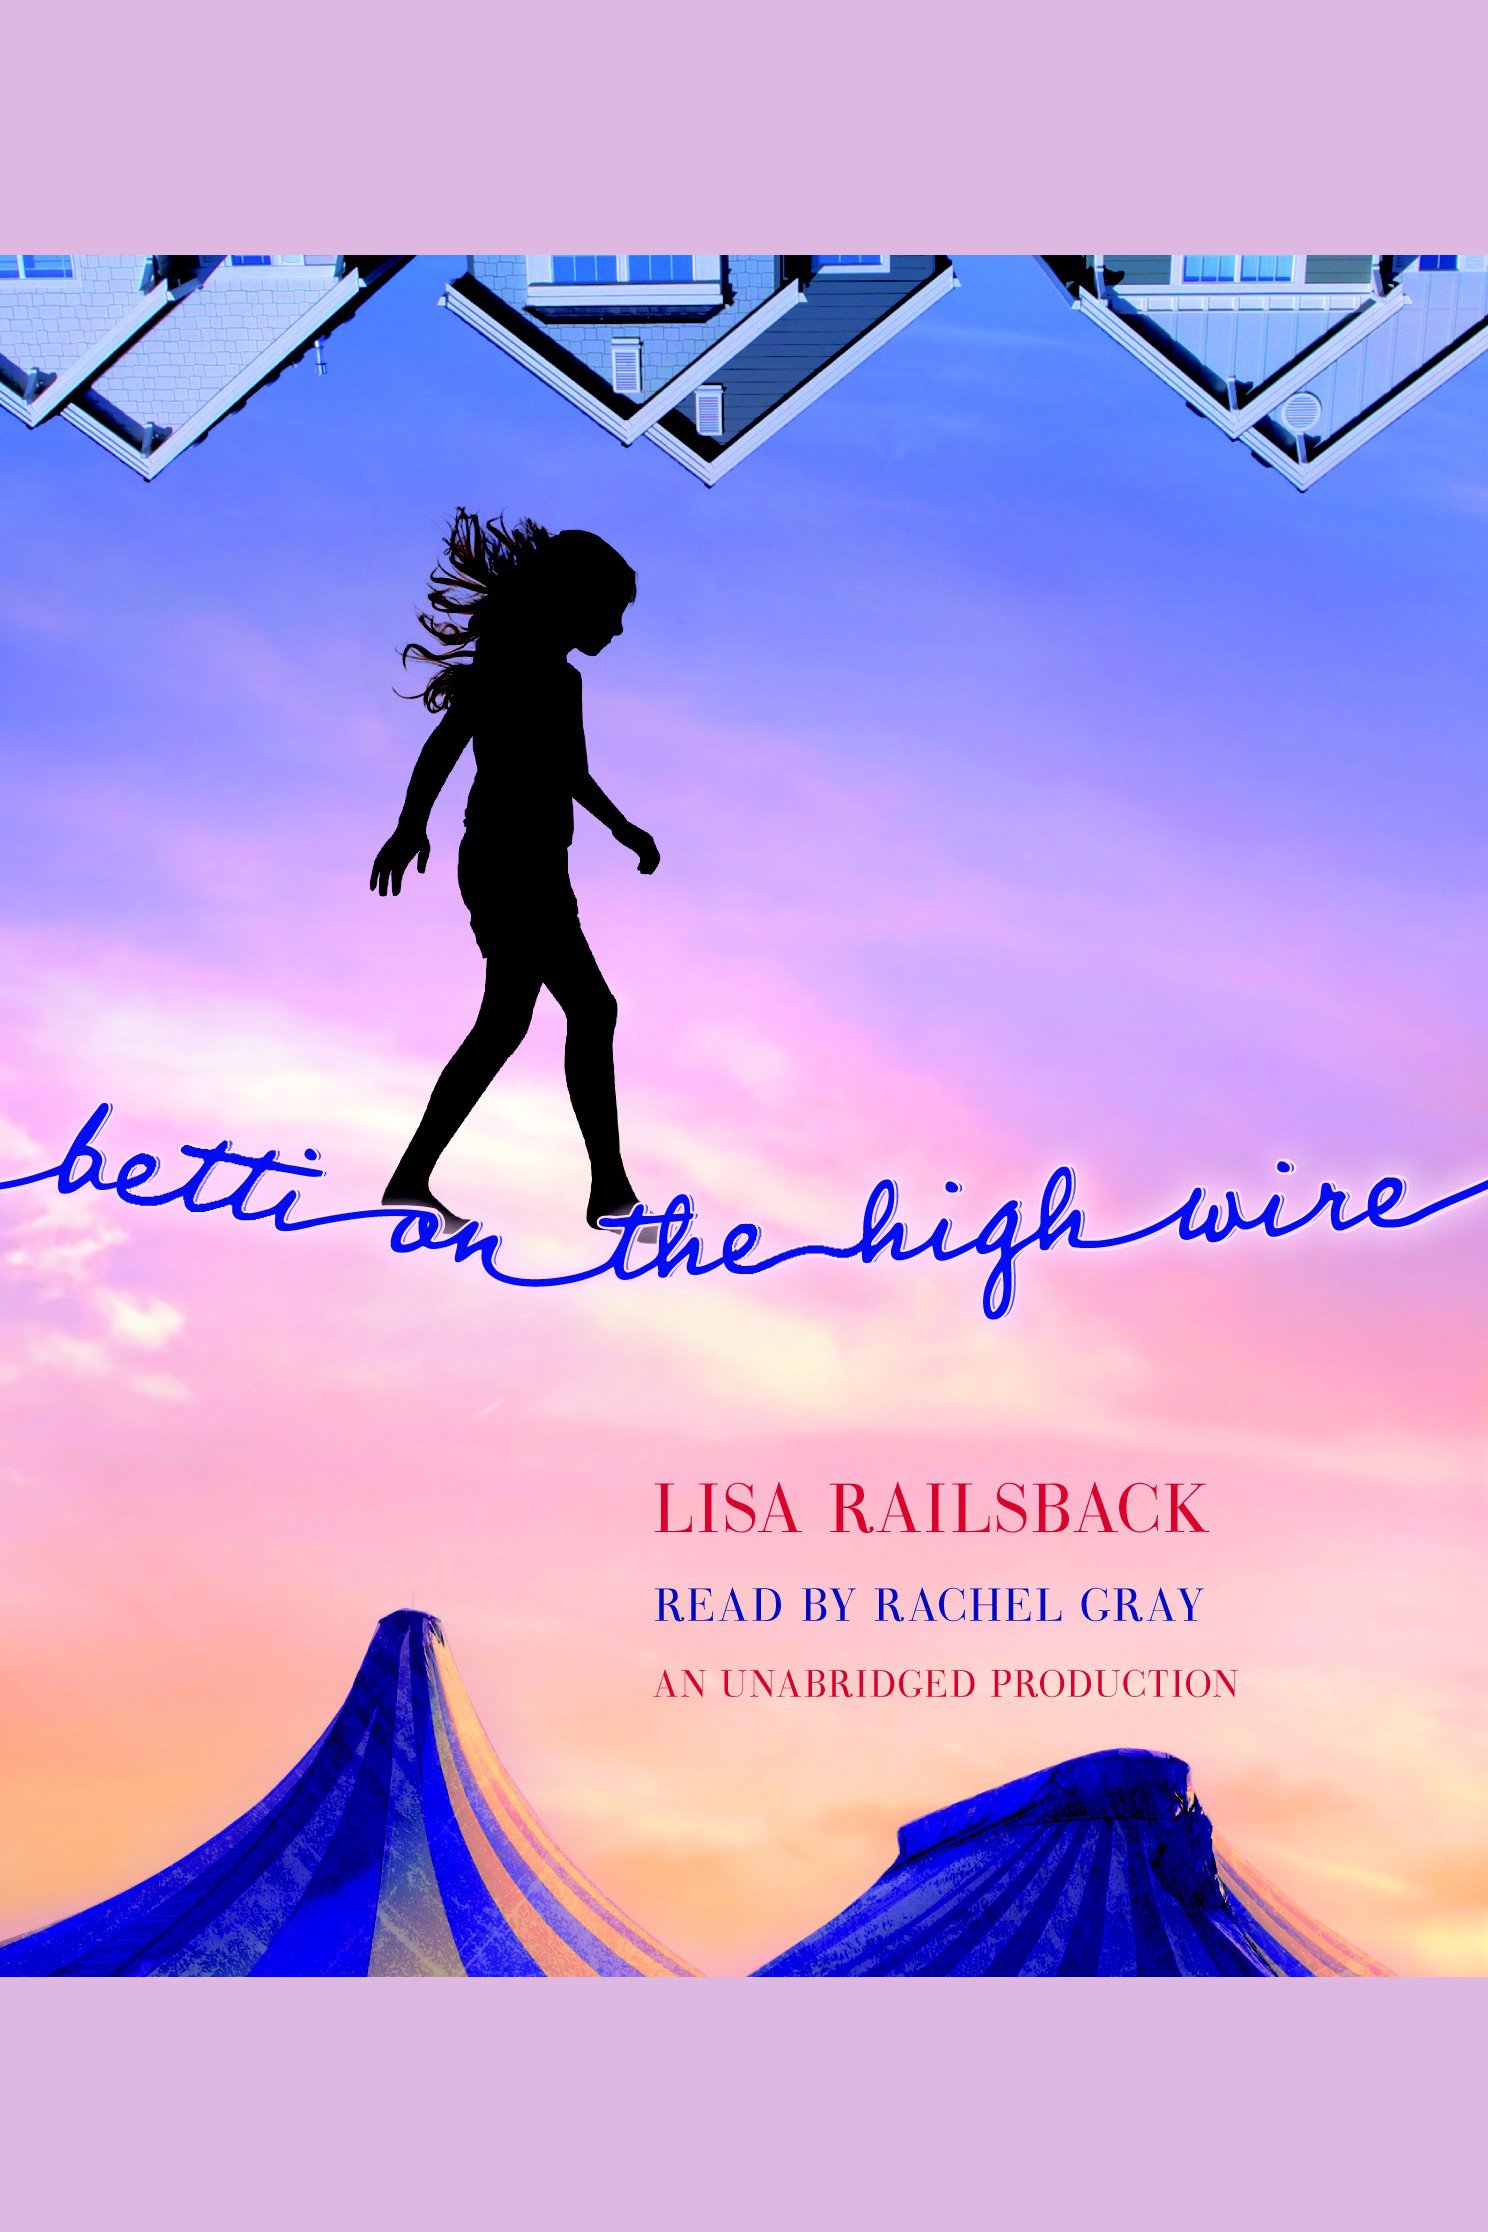 Betti on the high wire cover image